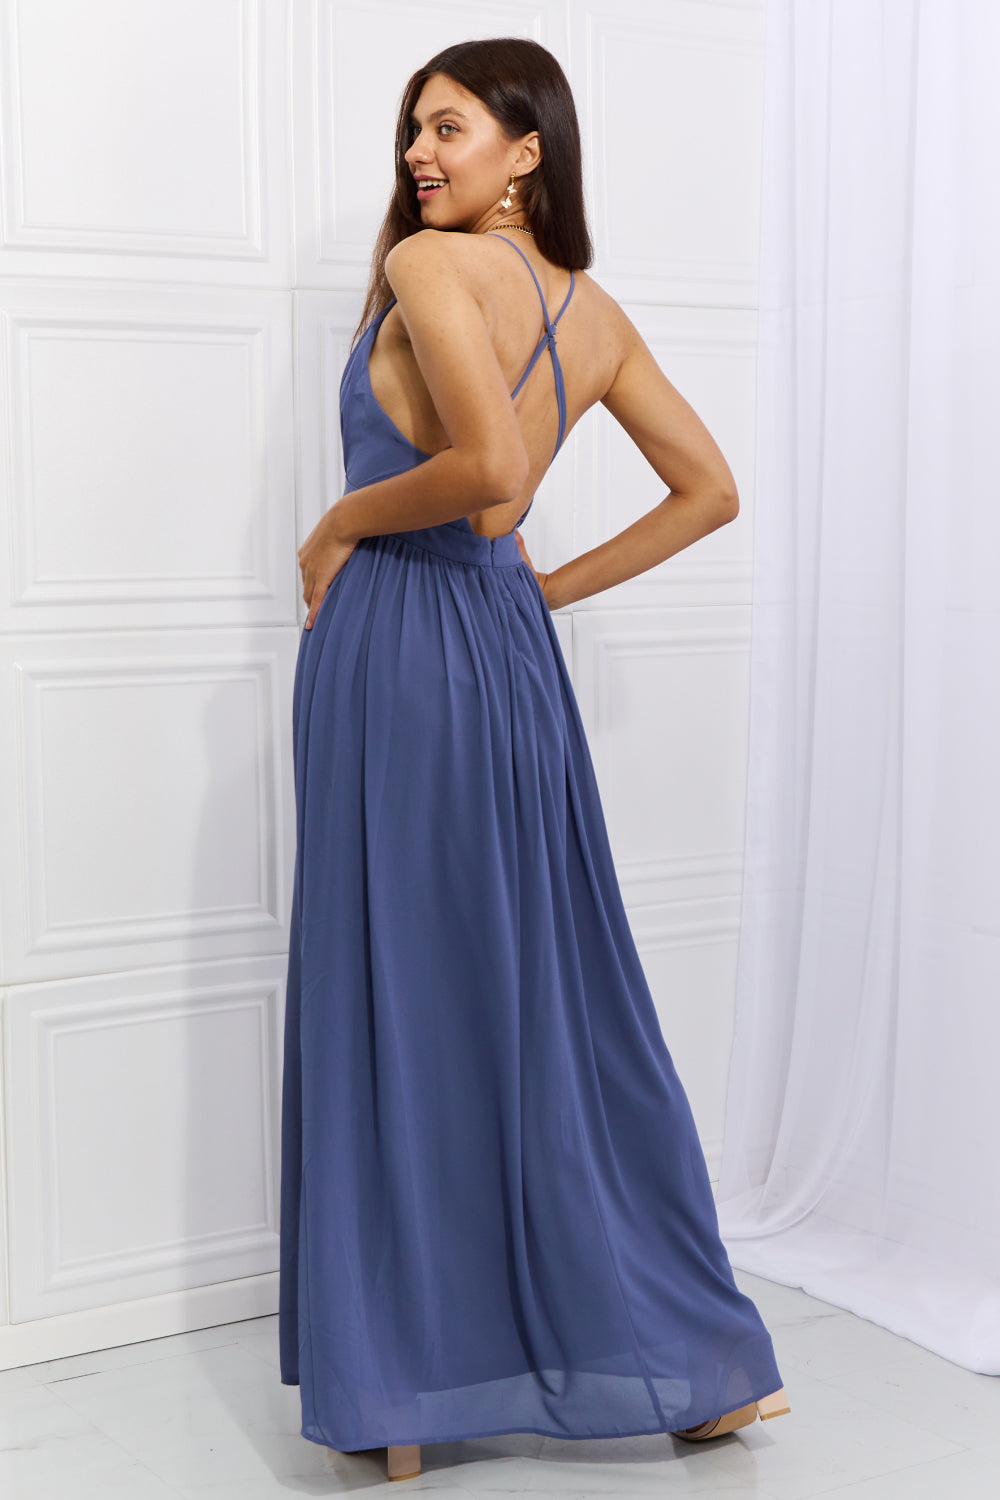 Captivating Muse Open Crossback Maxi Dress in Dusty Blue